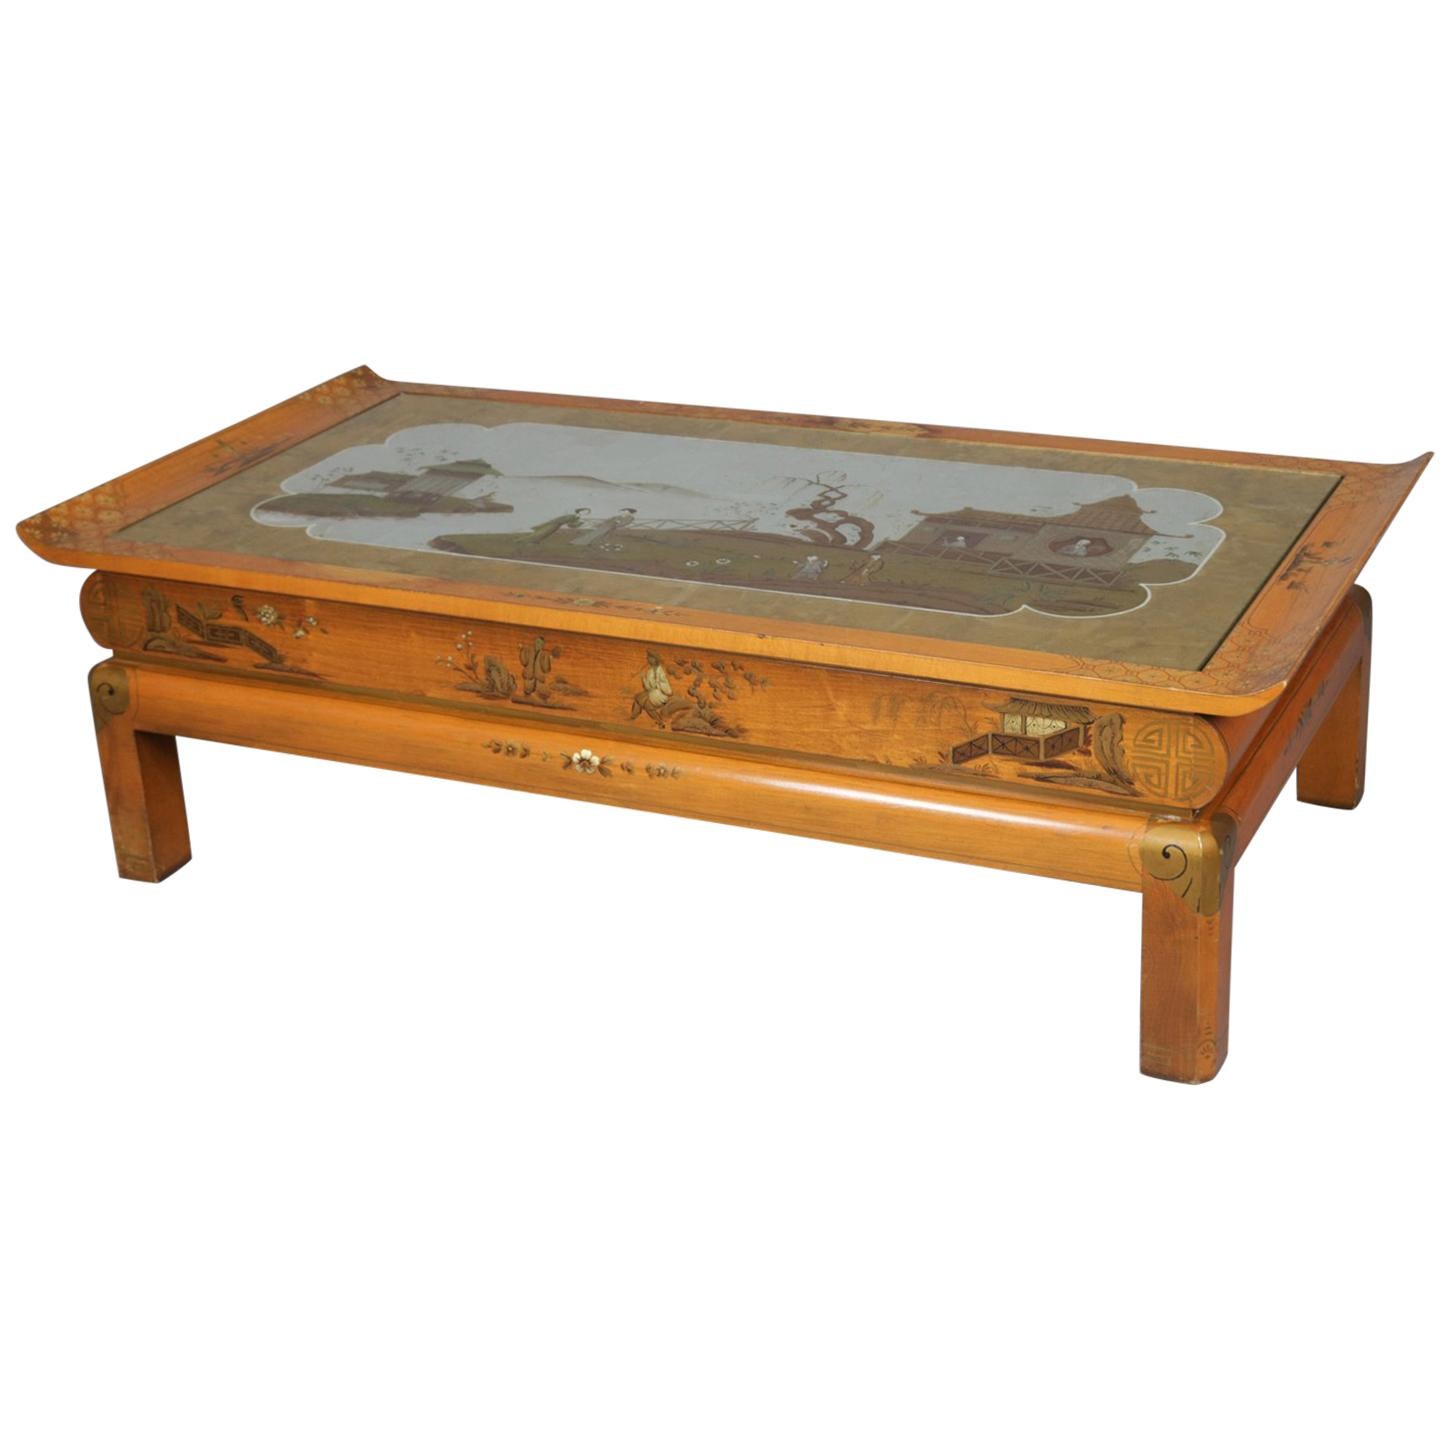 Oversized Hand-Painted and Gilt Pictorial Chinoiserie Coffee Table, circa 1940 For Sale